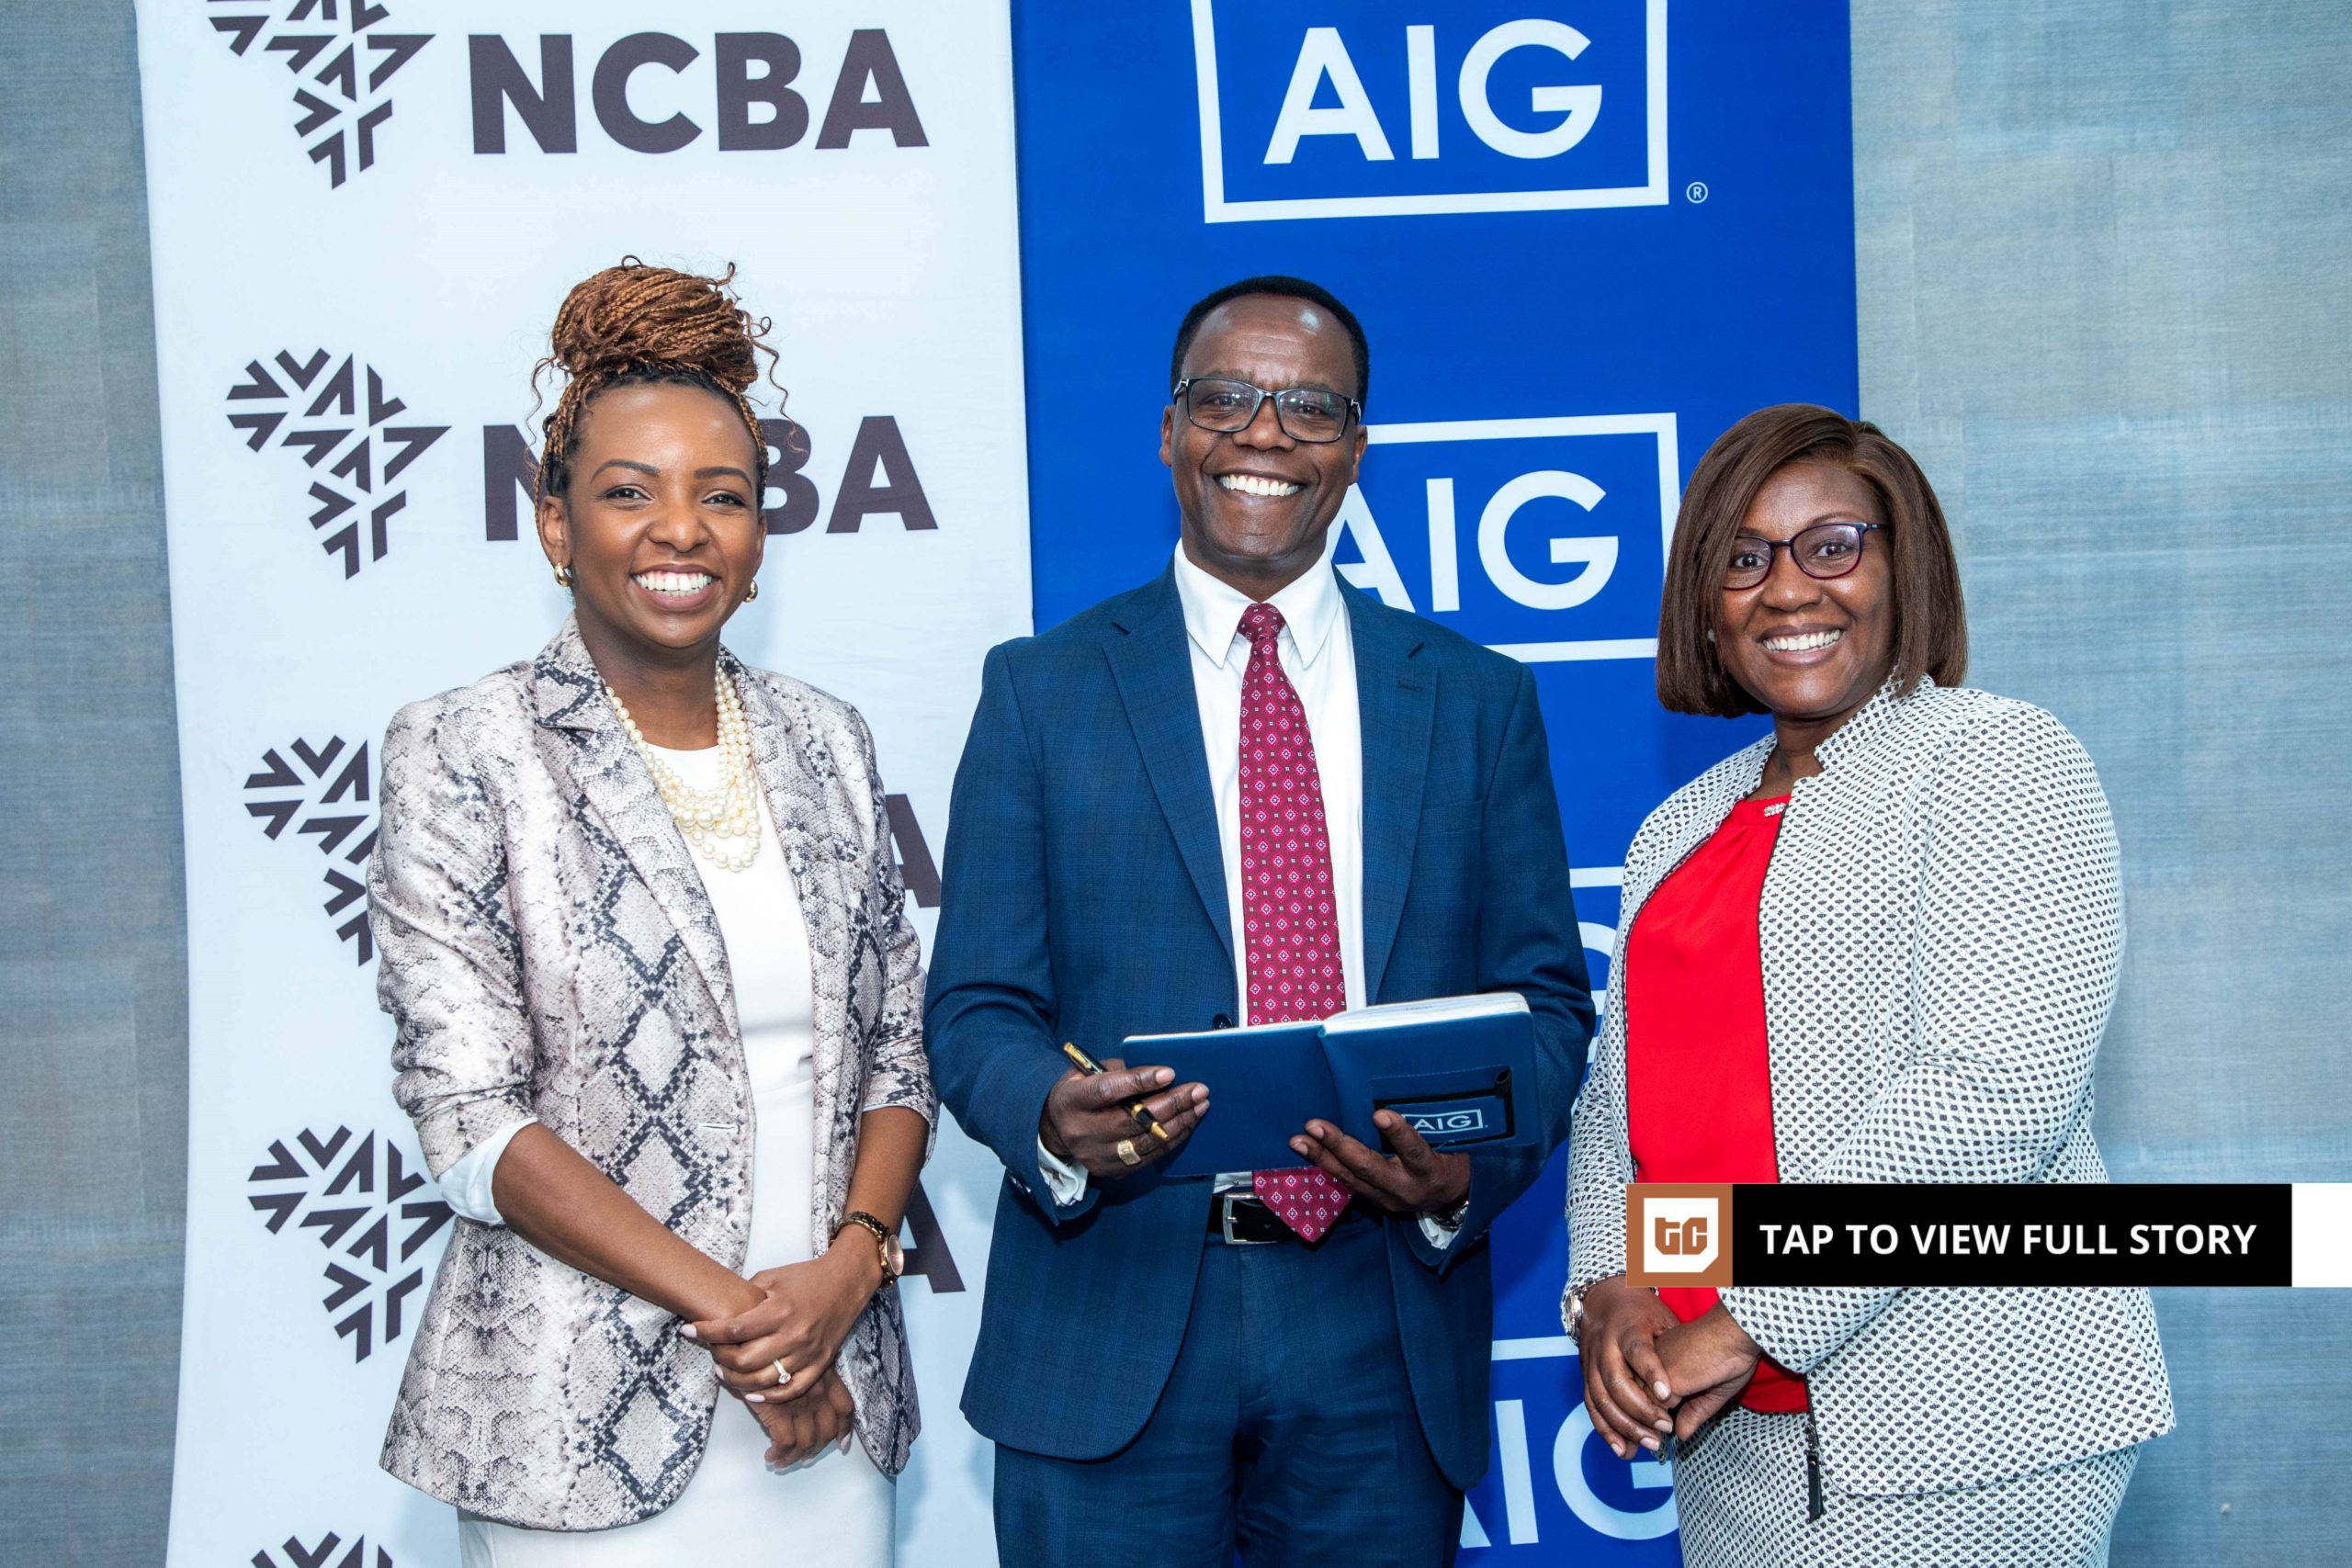 Kenya’s NCBA Group acquires insurer AIG Kenya for an undisclosed quantity